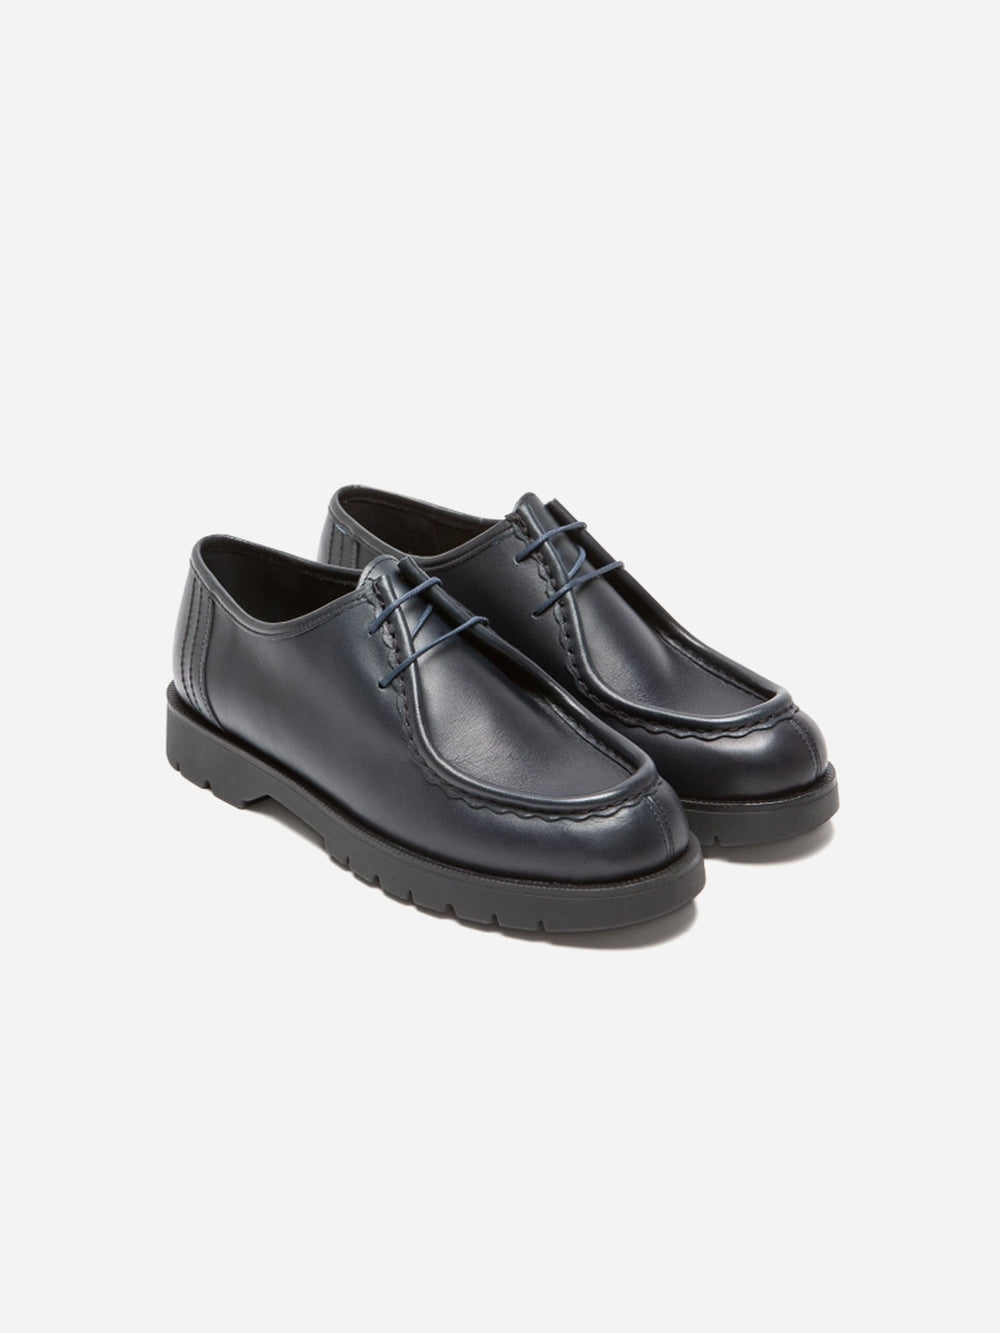 NAVY Kleman Padror Loafer Shoes